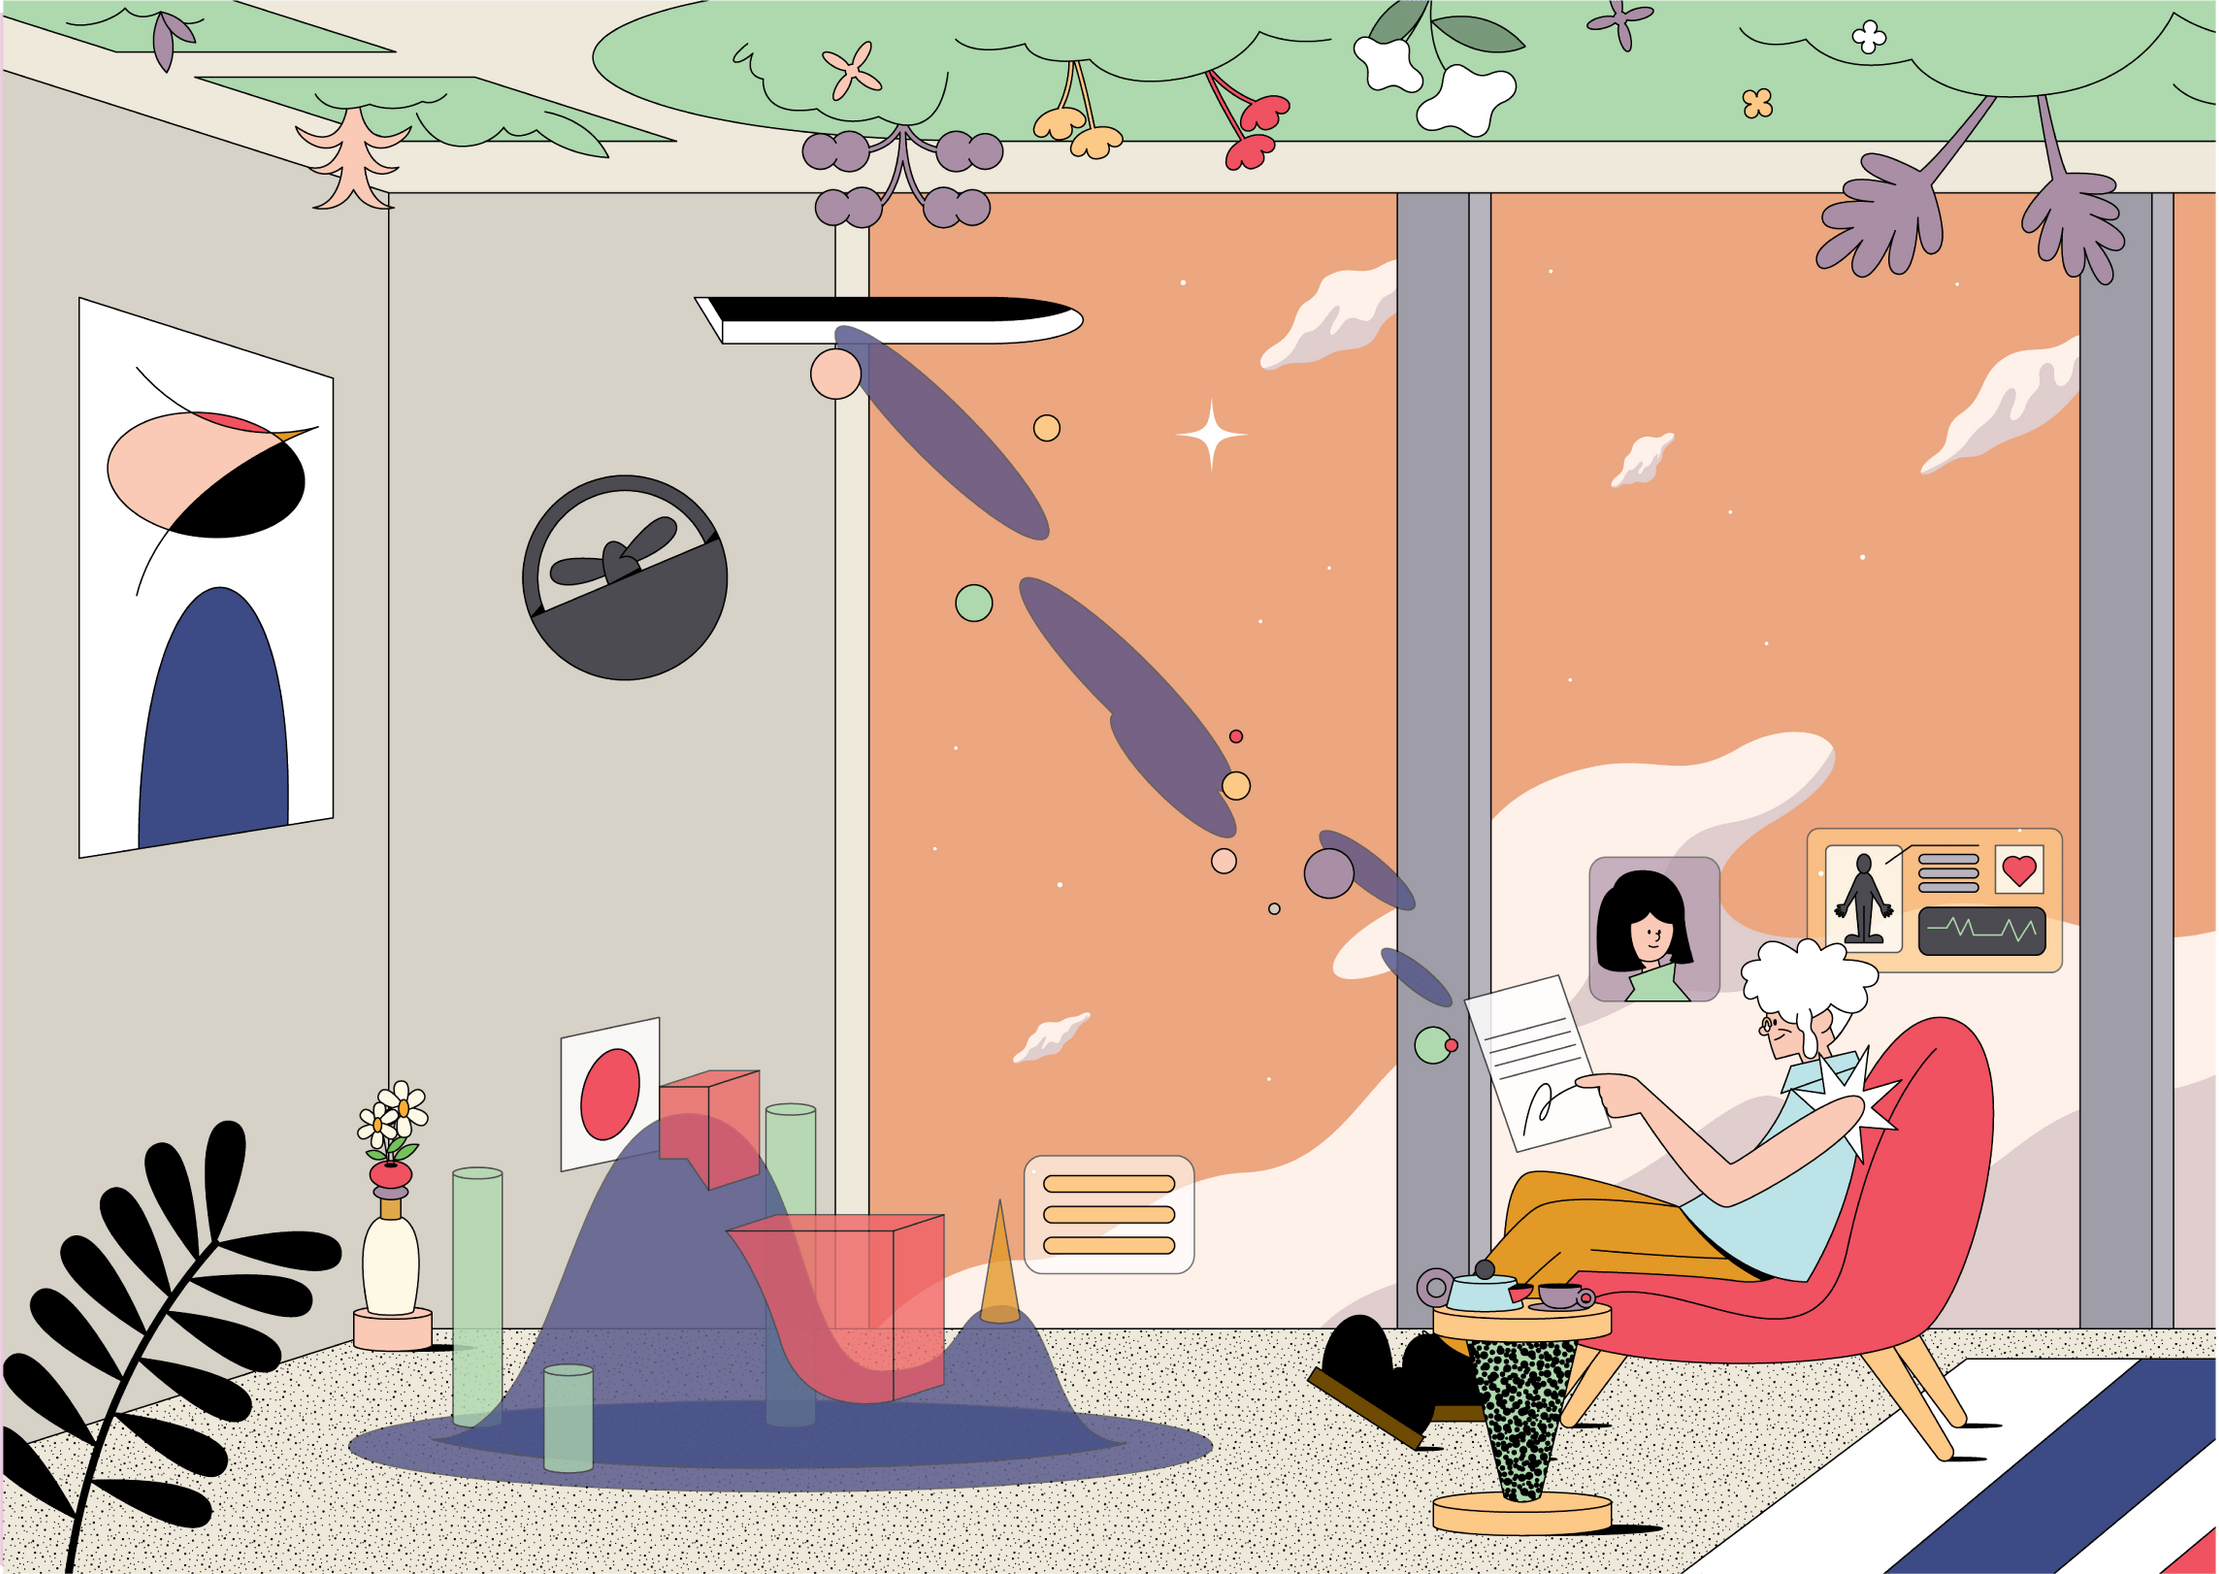 An illustration showing a character sat in a chair in front of two floor to ceiling windows that look out on a cloudy sky.